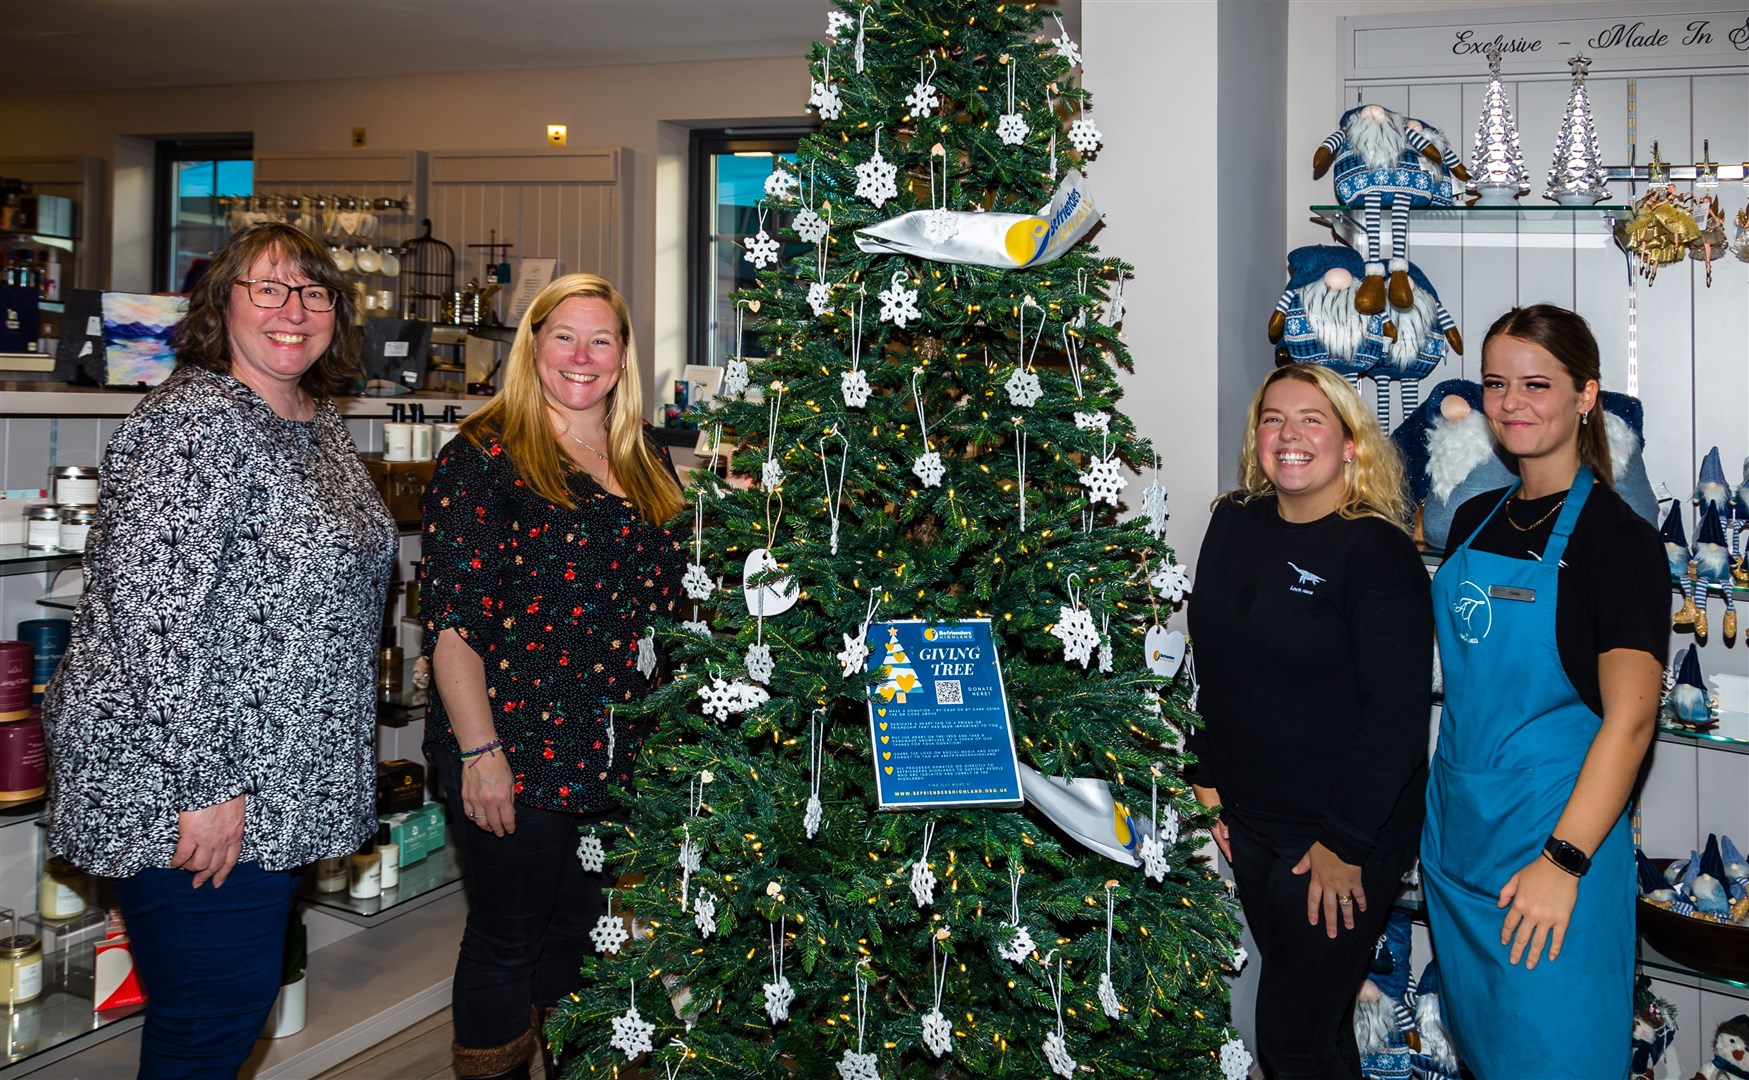 At the Giving Tree at An Talla are (from left) Susan White, executive director, Befrienders Highland, Jo Page, volunteer director, Befrienders Highland, Kelly Bruce, marketing manager, Jacobite/An Talla, and Caitlyn McLean, Jacobite team member.